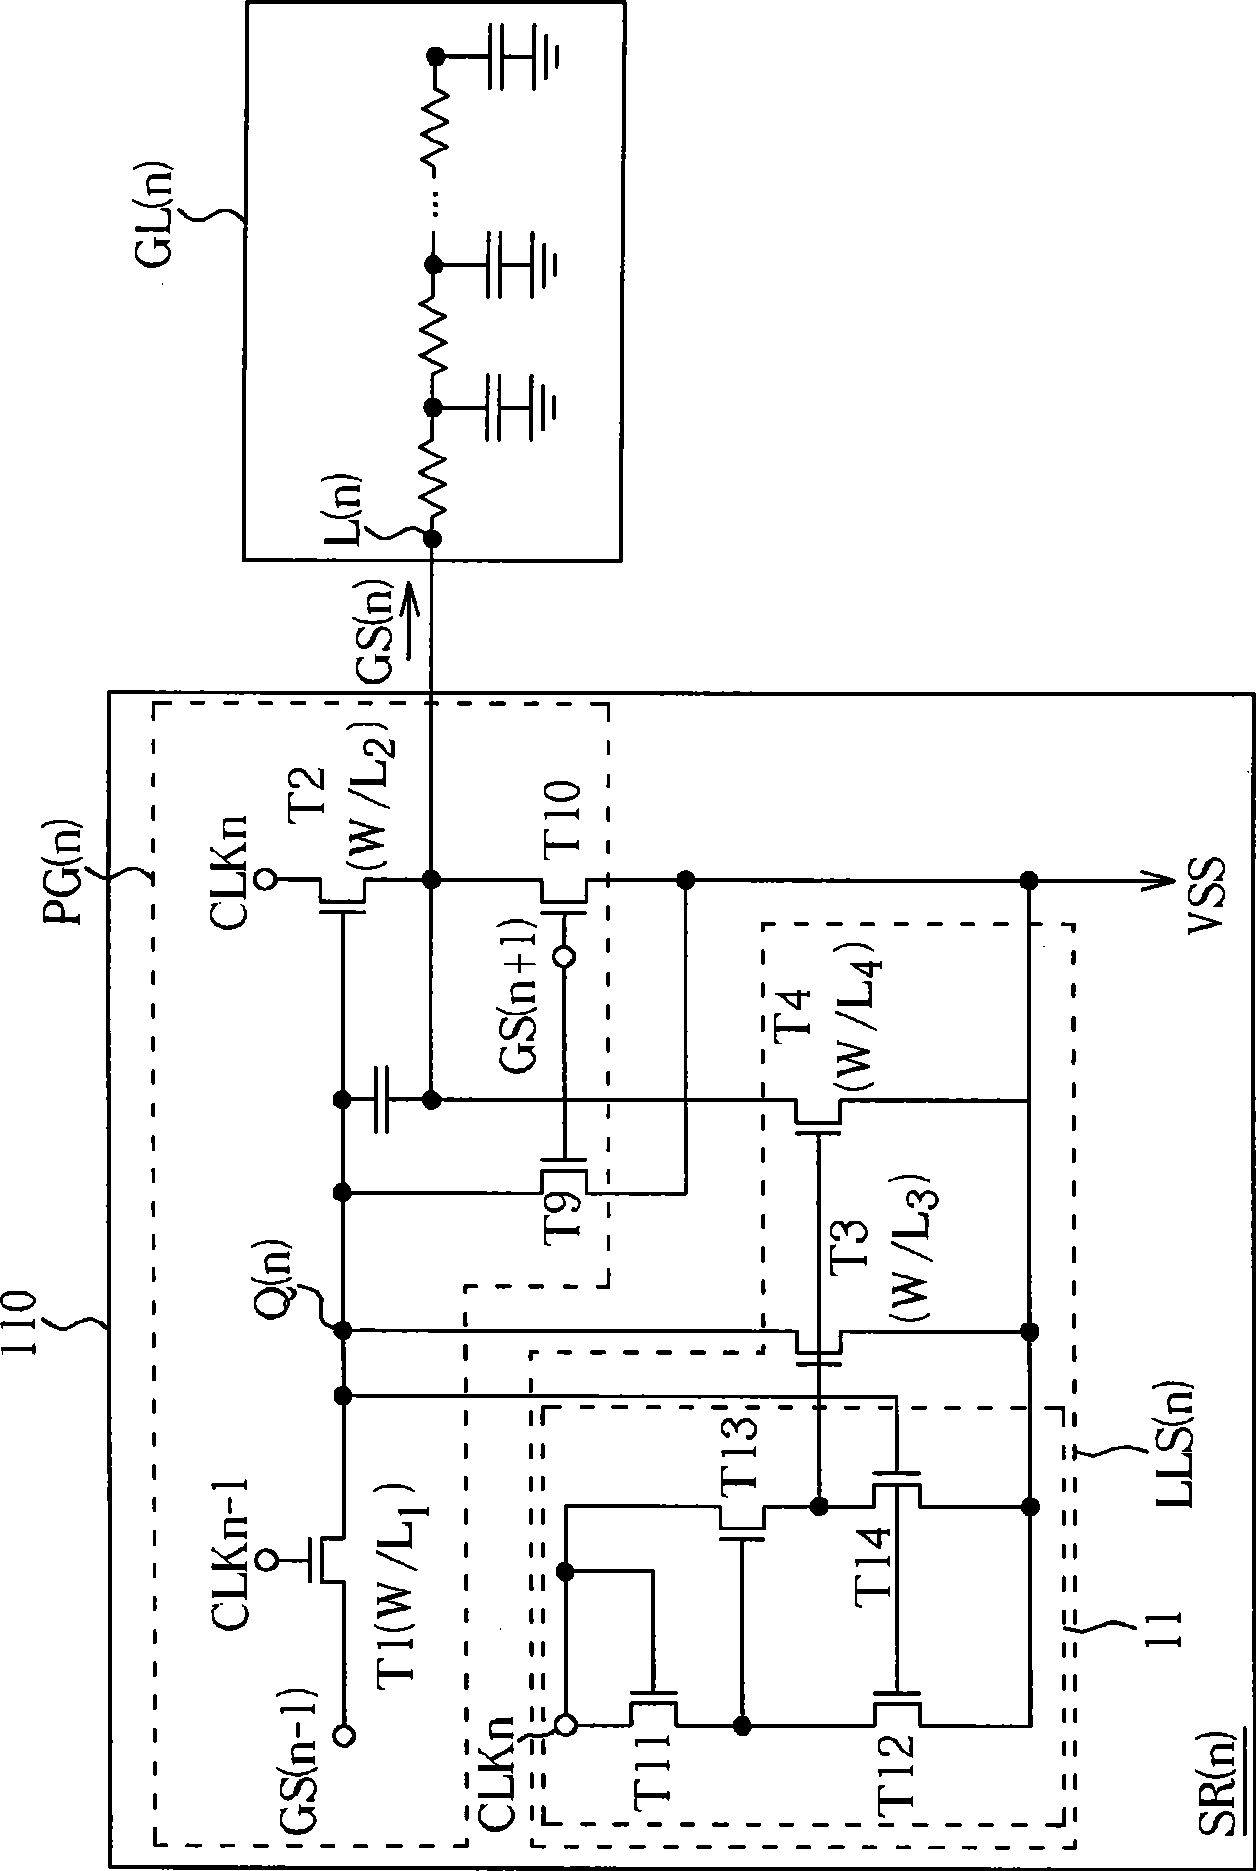 Liquid crystal display apparatus having bi-directional voltage stabilizing function and shift register